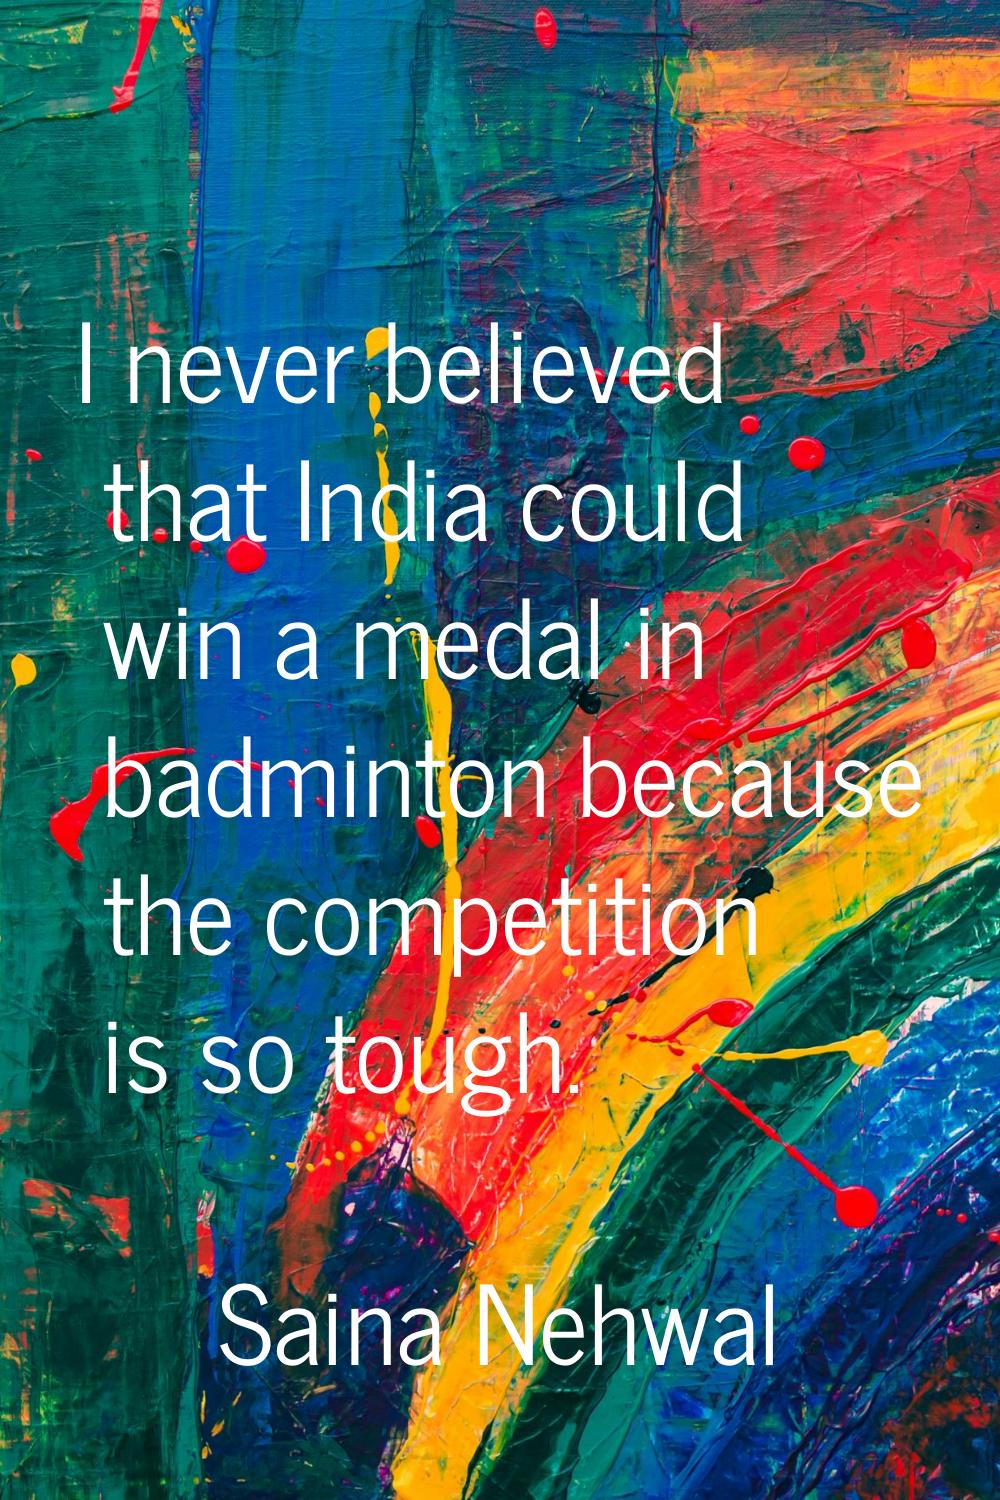 I never believed that India could win a medal in badminton because the competition is so tough.